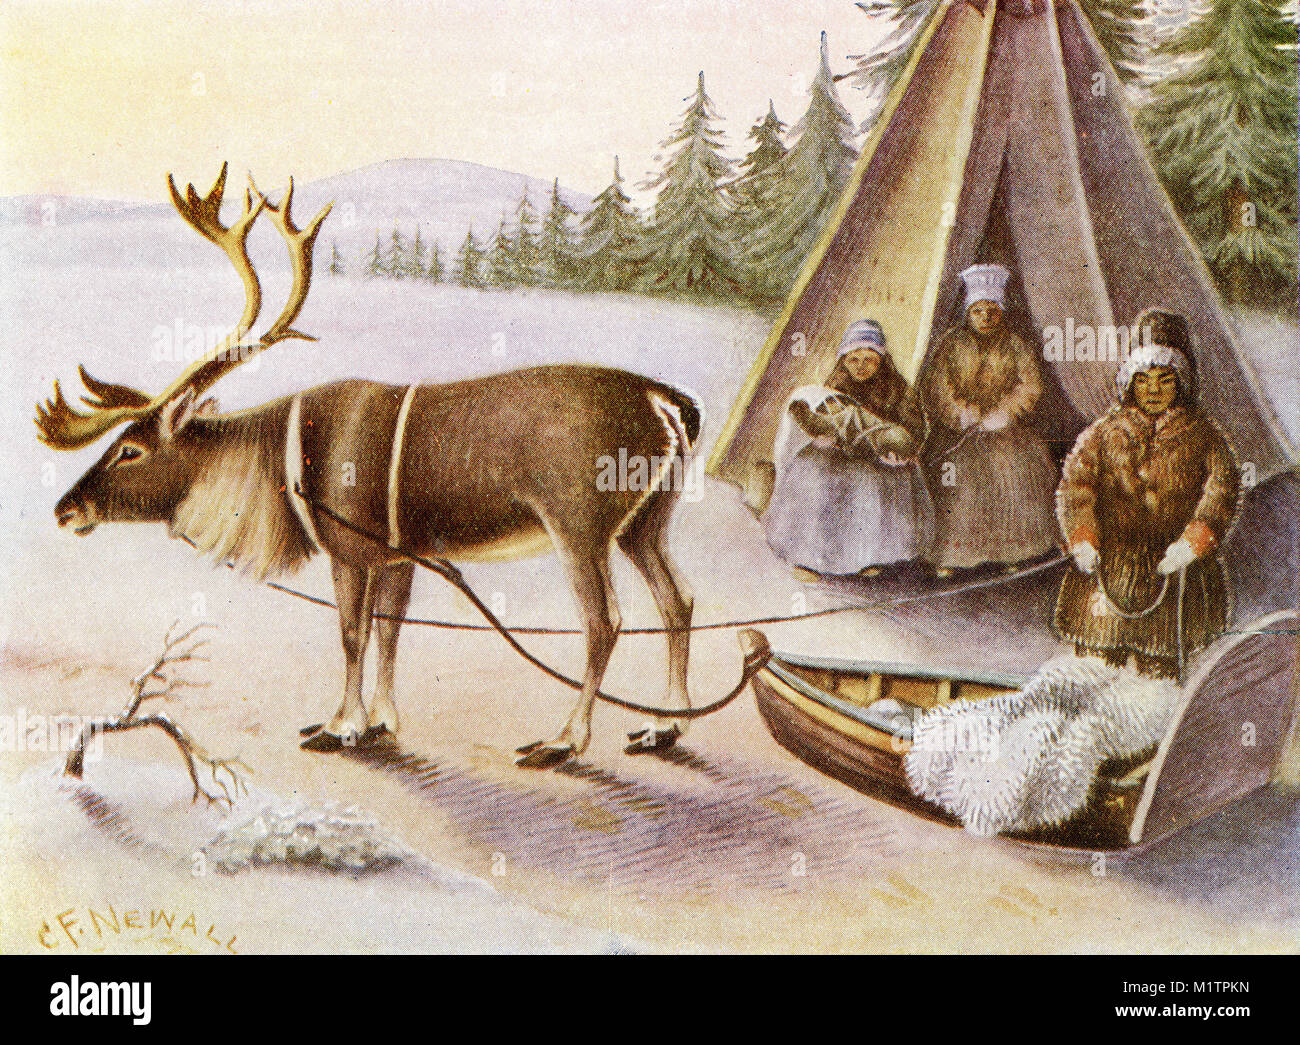 Halftone illustration of Lapplanders with a reindeer at their camp, circa 1900. The baby has been laced into an animal skin to keep it warm. From an original image in How Other People Live by H. Clive Barnard, 1918. Stock Photo